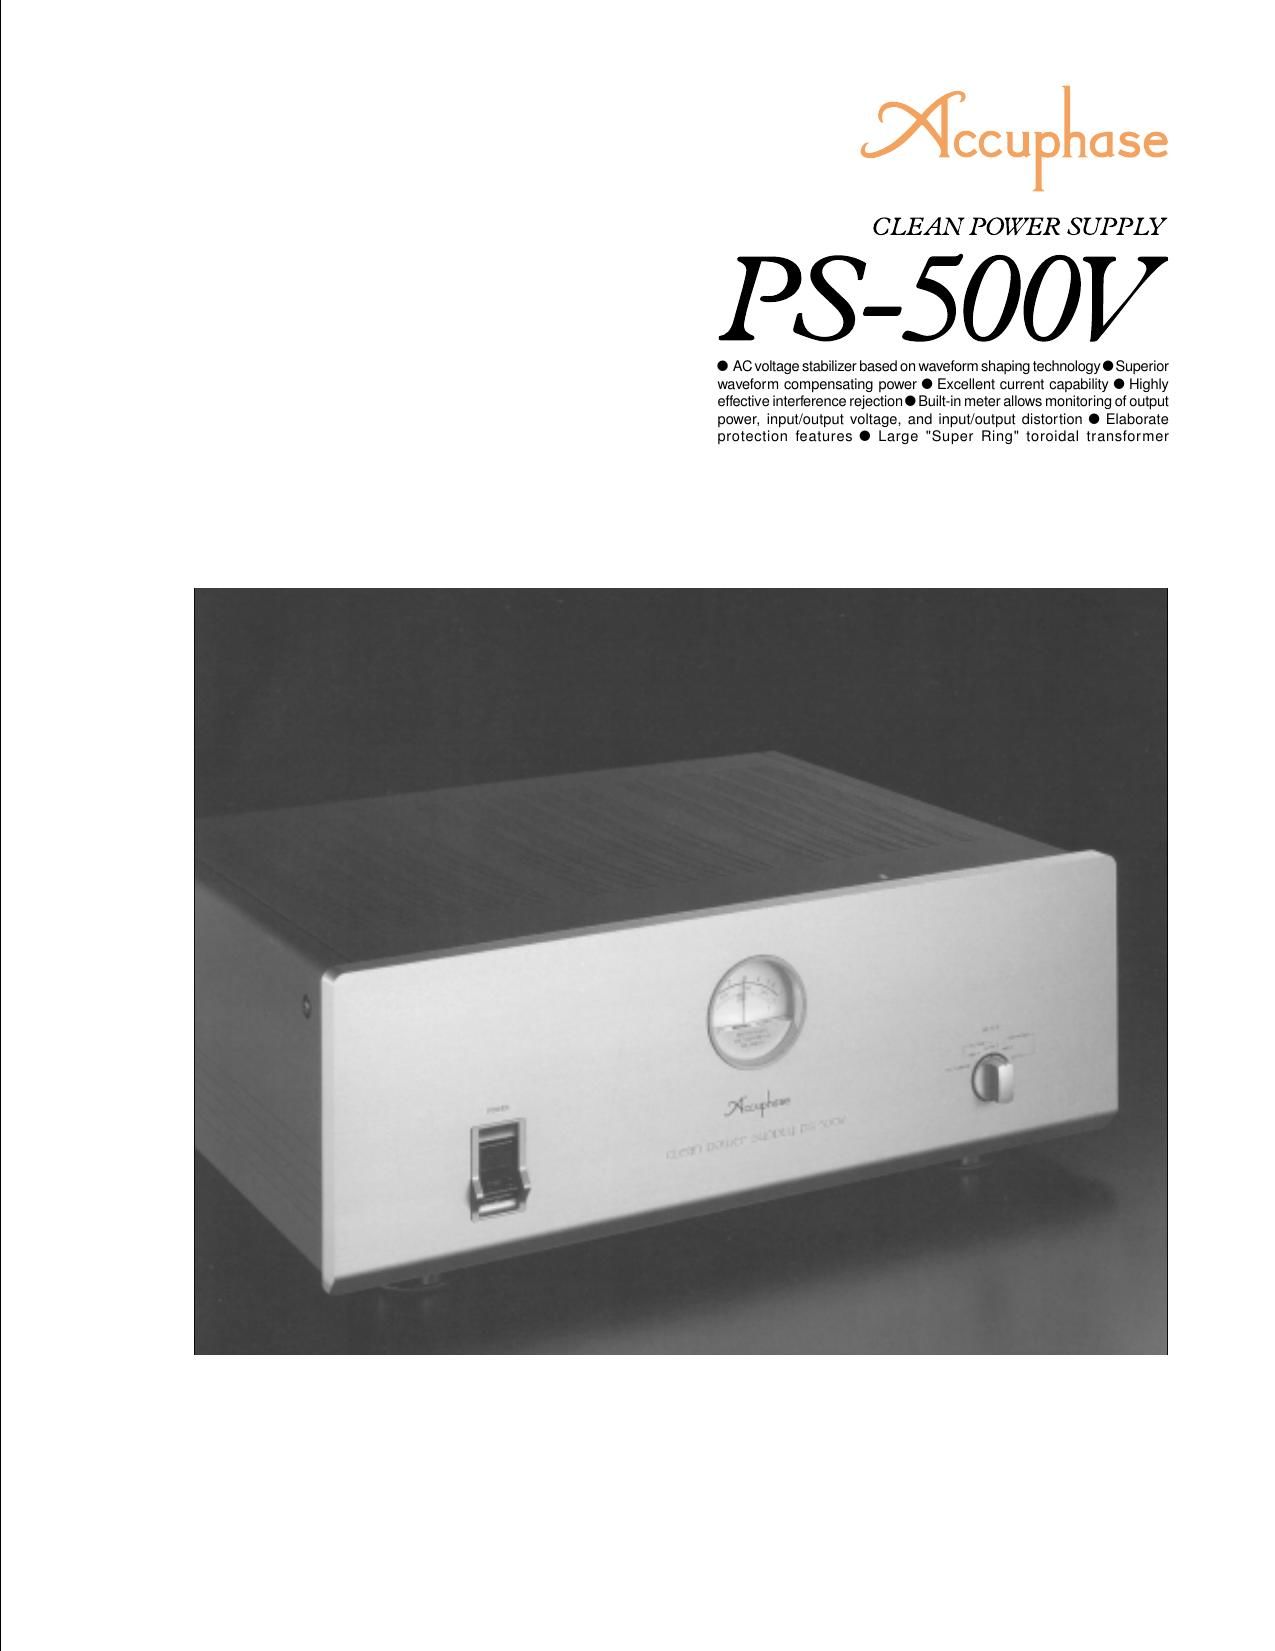 Accuphase PS 500 V Brochure